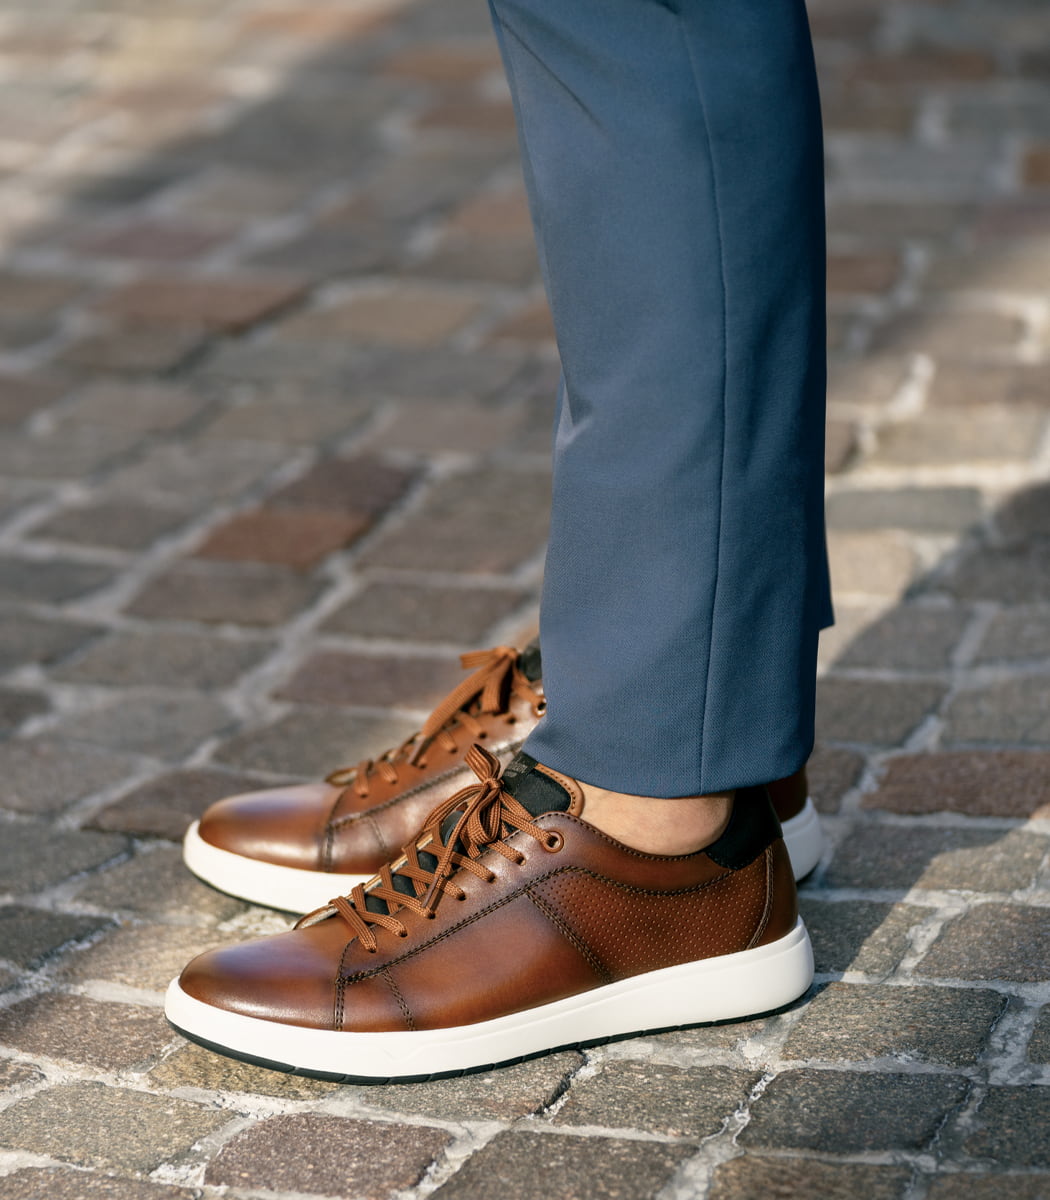 The featured product is the Heist Lace to Toe Sneaker in Cognac.